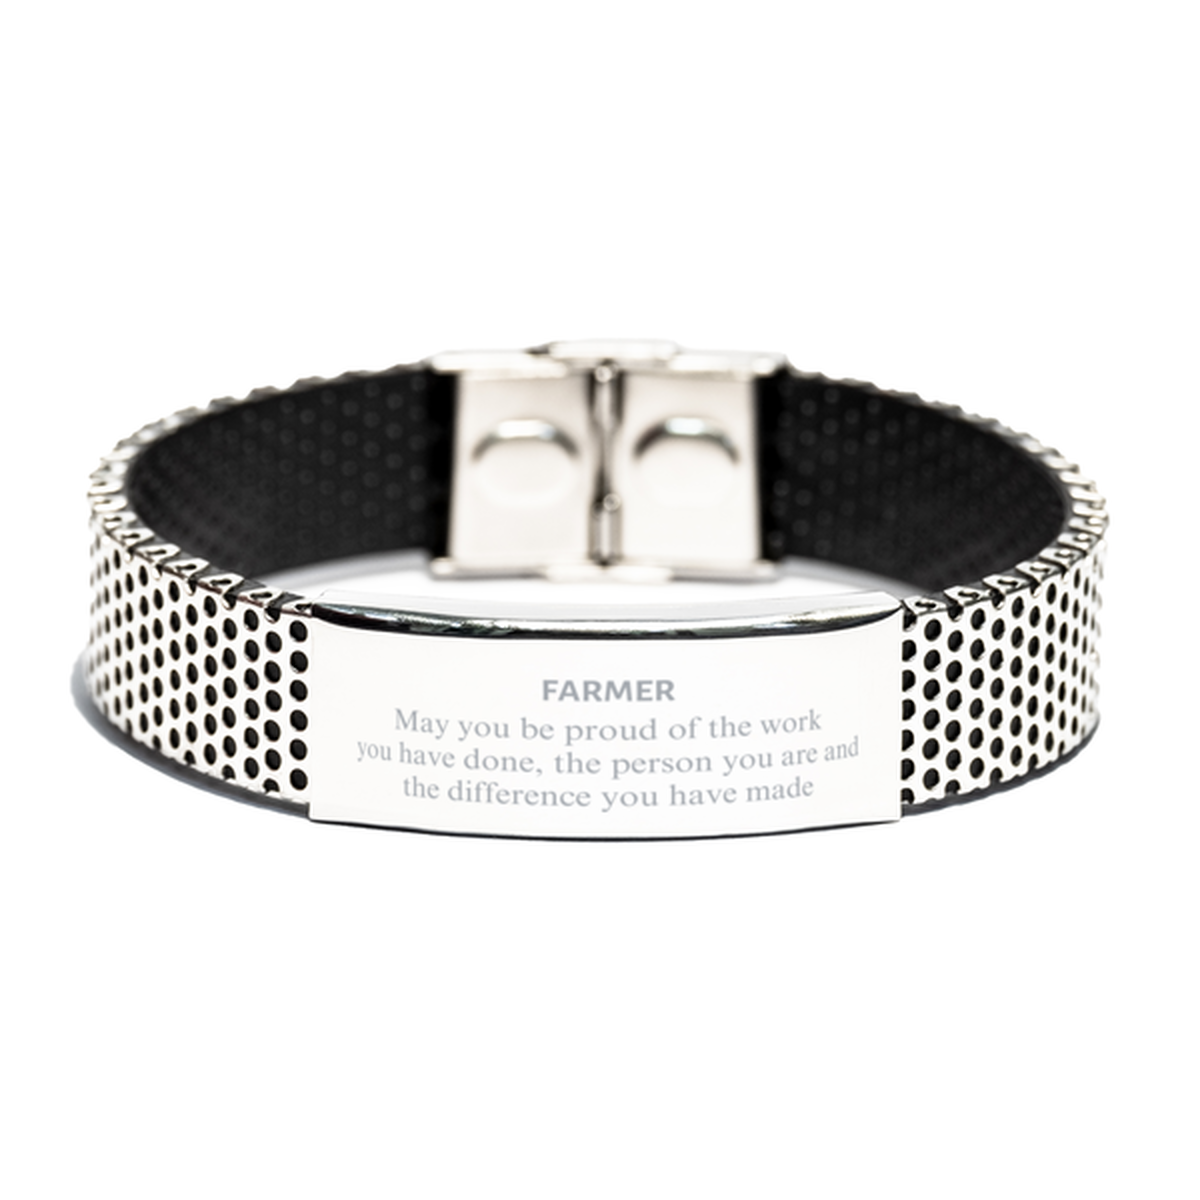 Farmer May you be proud of the work you have done, Retirement Farmer Stainless Steel Bracelet for Colleague Appreciation Gifts Amazing for Farmer